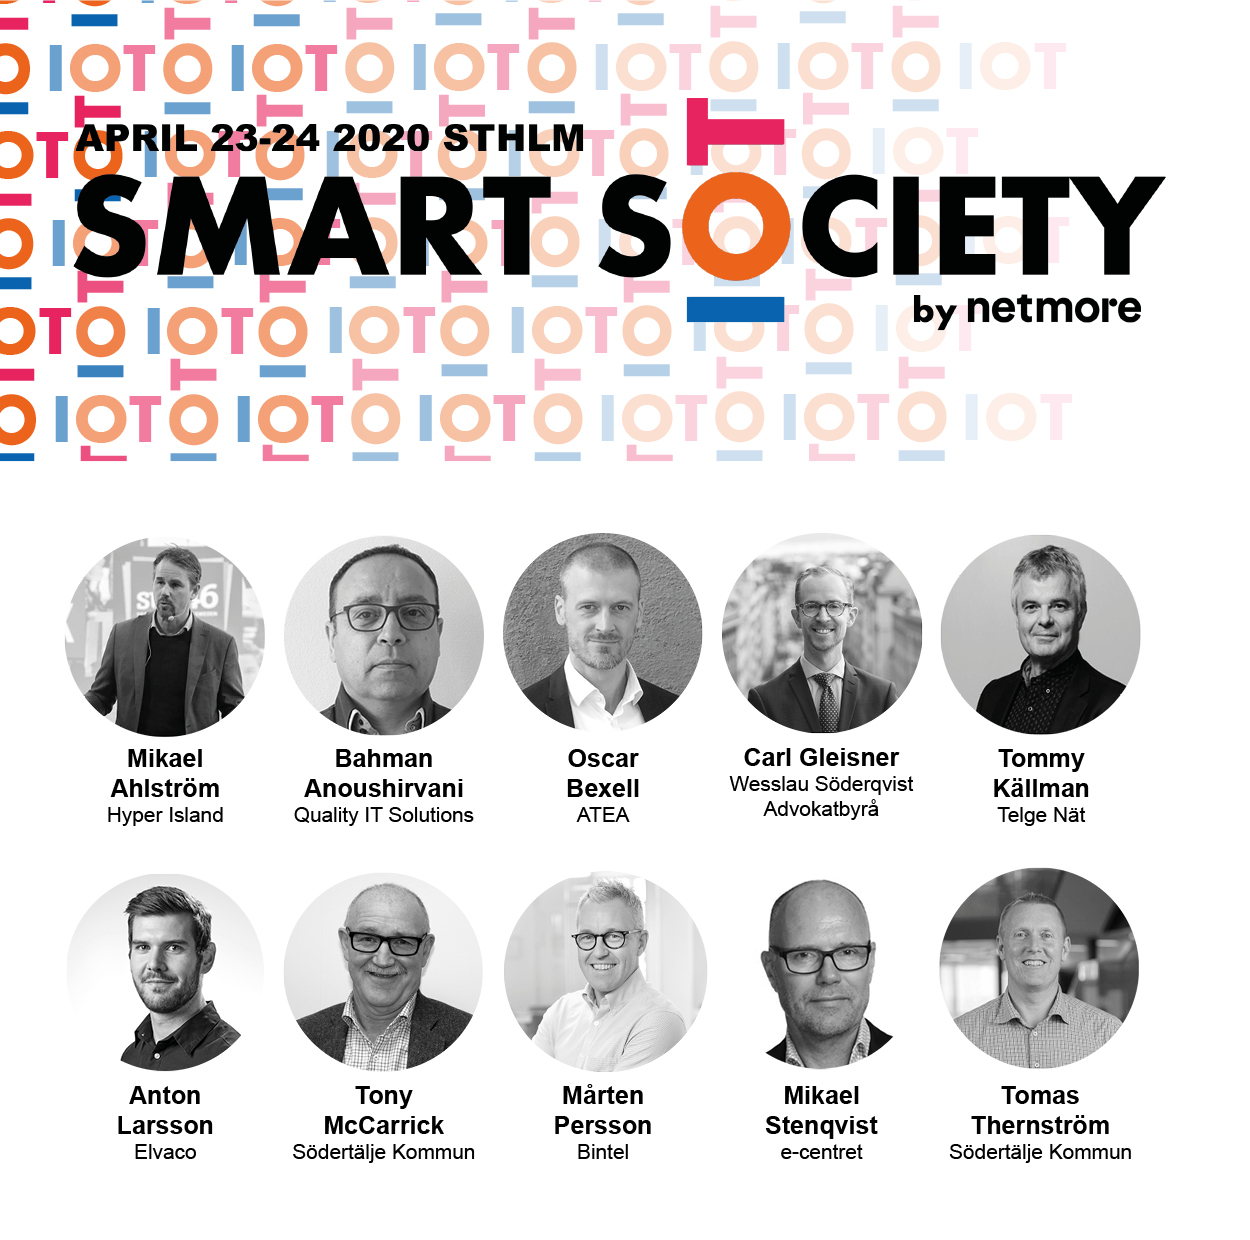 We are exhibiting at Smart Society in Stockholm on April 23-24